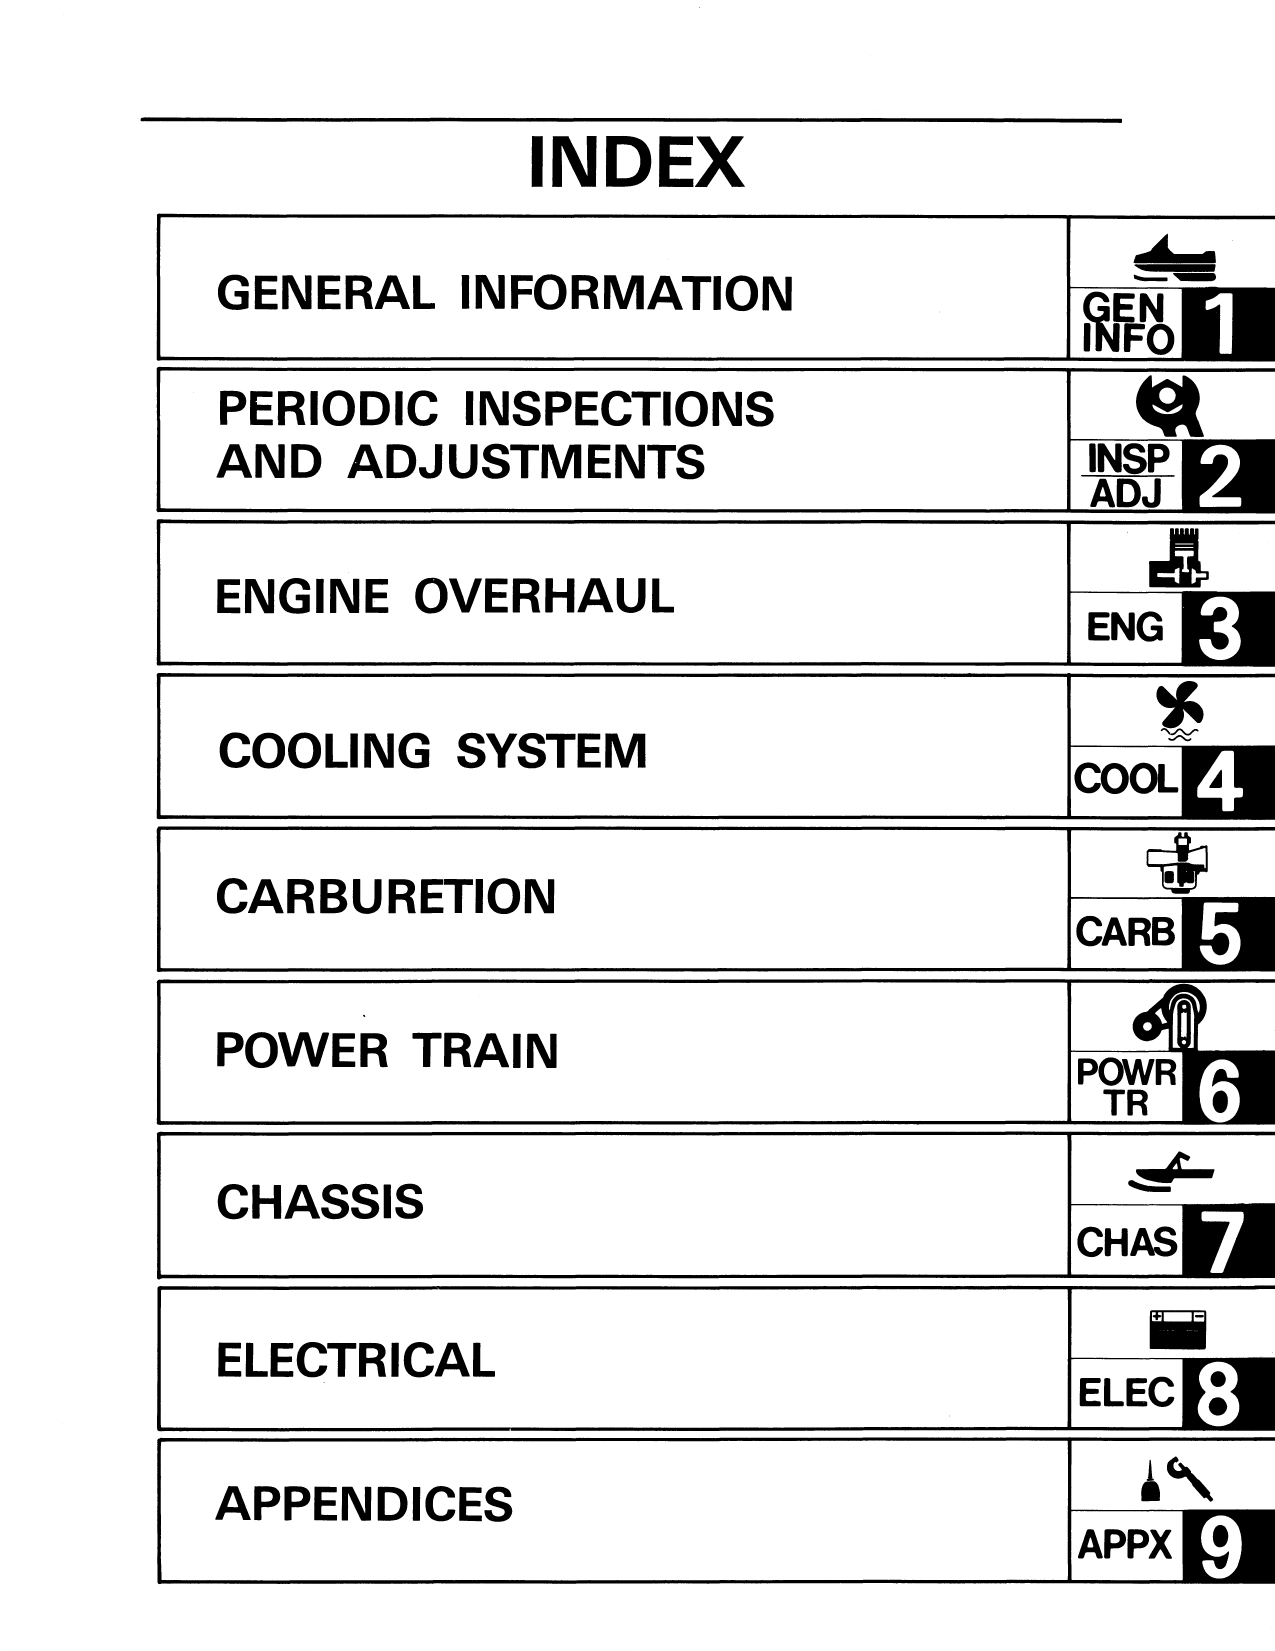 1986-1990 Yamaha Inviter 300, CF300 snowmobile service manual Preview image 2